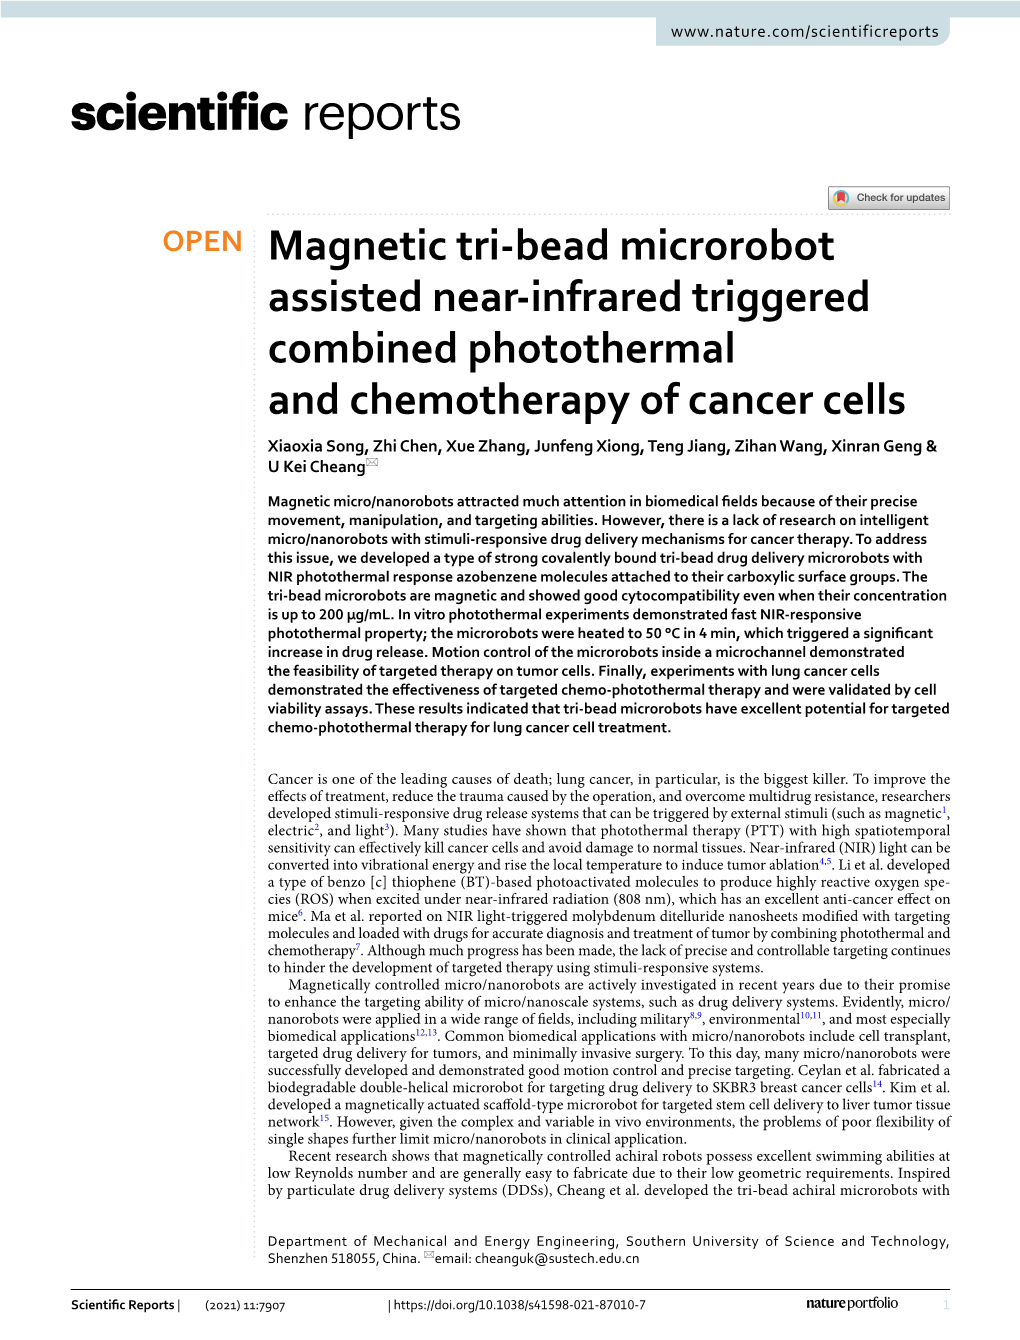 Magnetic Tri-Bead Microrobot Assisted Near-Infrared Triggered Combined Photothermal and Chemotherapy of Cancer Cells